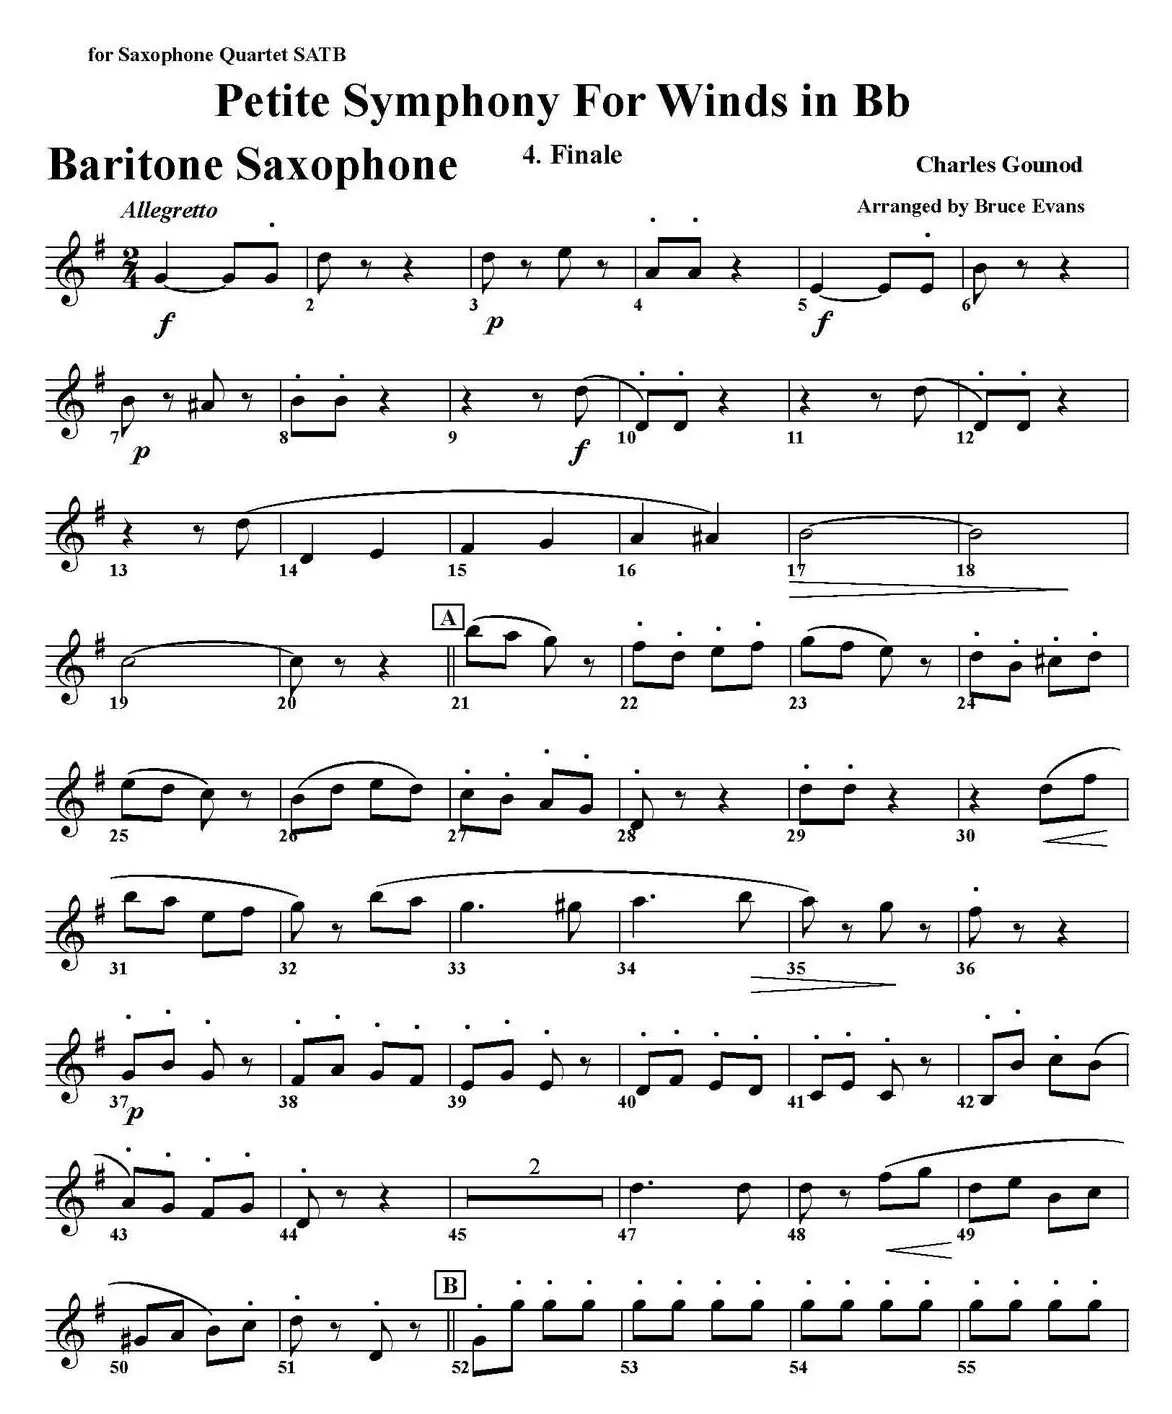 Petite Symphony For Winds in Bb（四重奏·上低音萨克斯分谱）